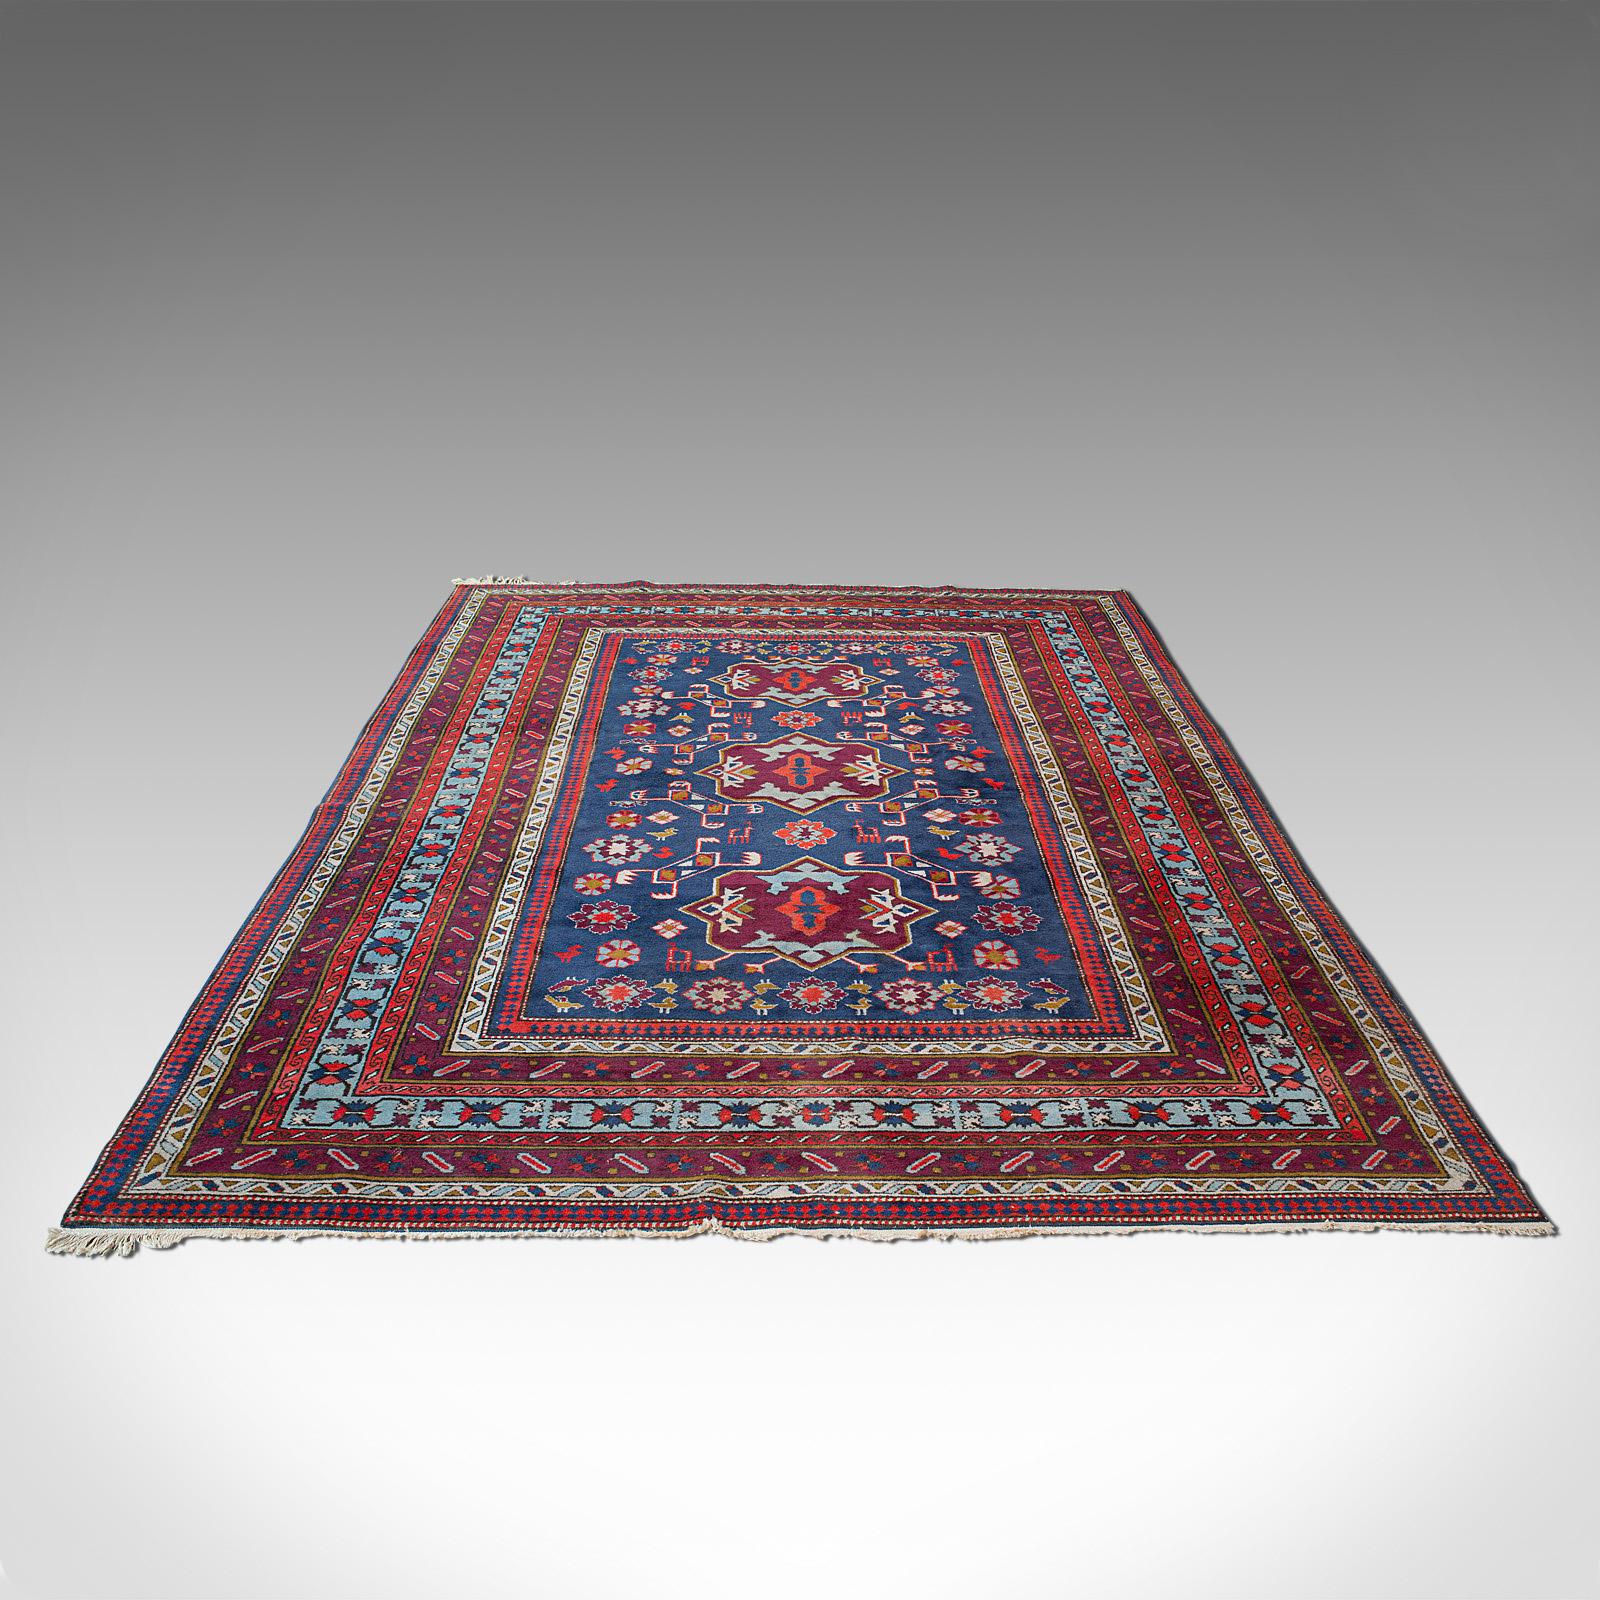 This is a vintage Shirvan rug. A Caucasian, woven pile lounge or hall carpet, dating to the mid 20th century, circa 1950.

Inviting colour and of good size at 207cm x 310cm (81.5